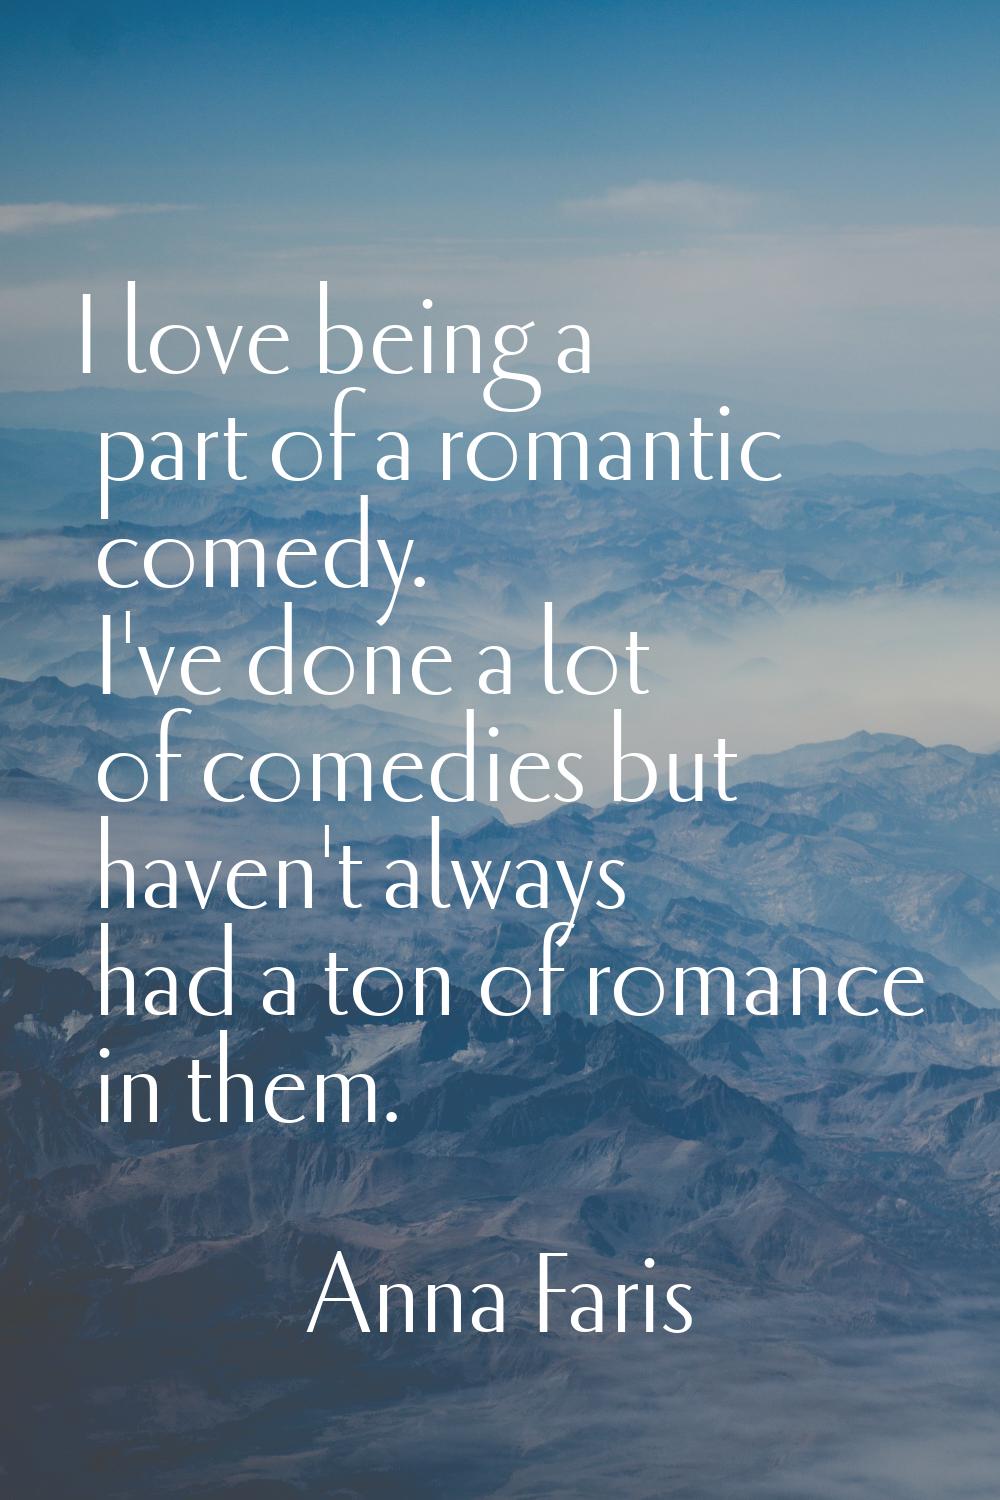 I love being a part of a romantic comedy. I've done a lot of comedies but haven't always had a ton 